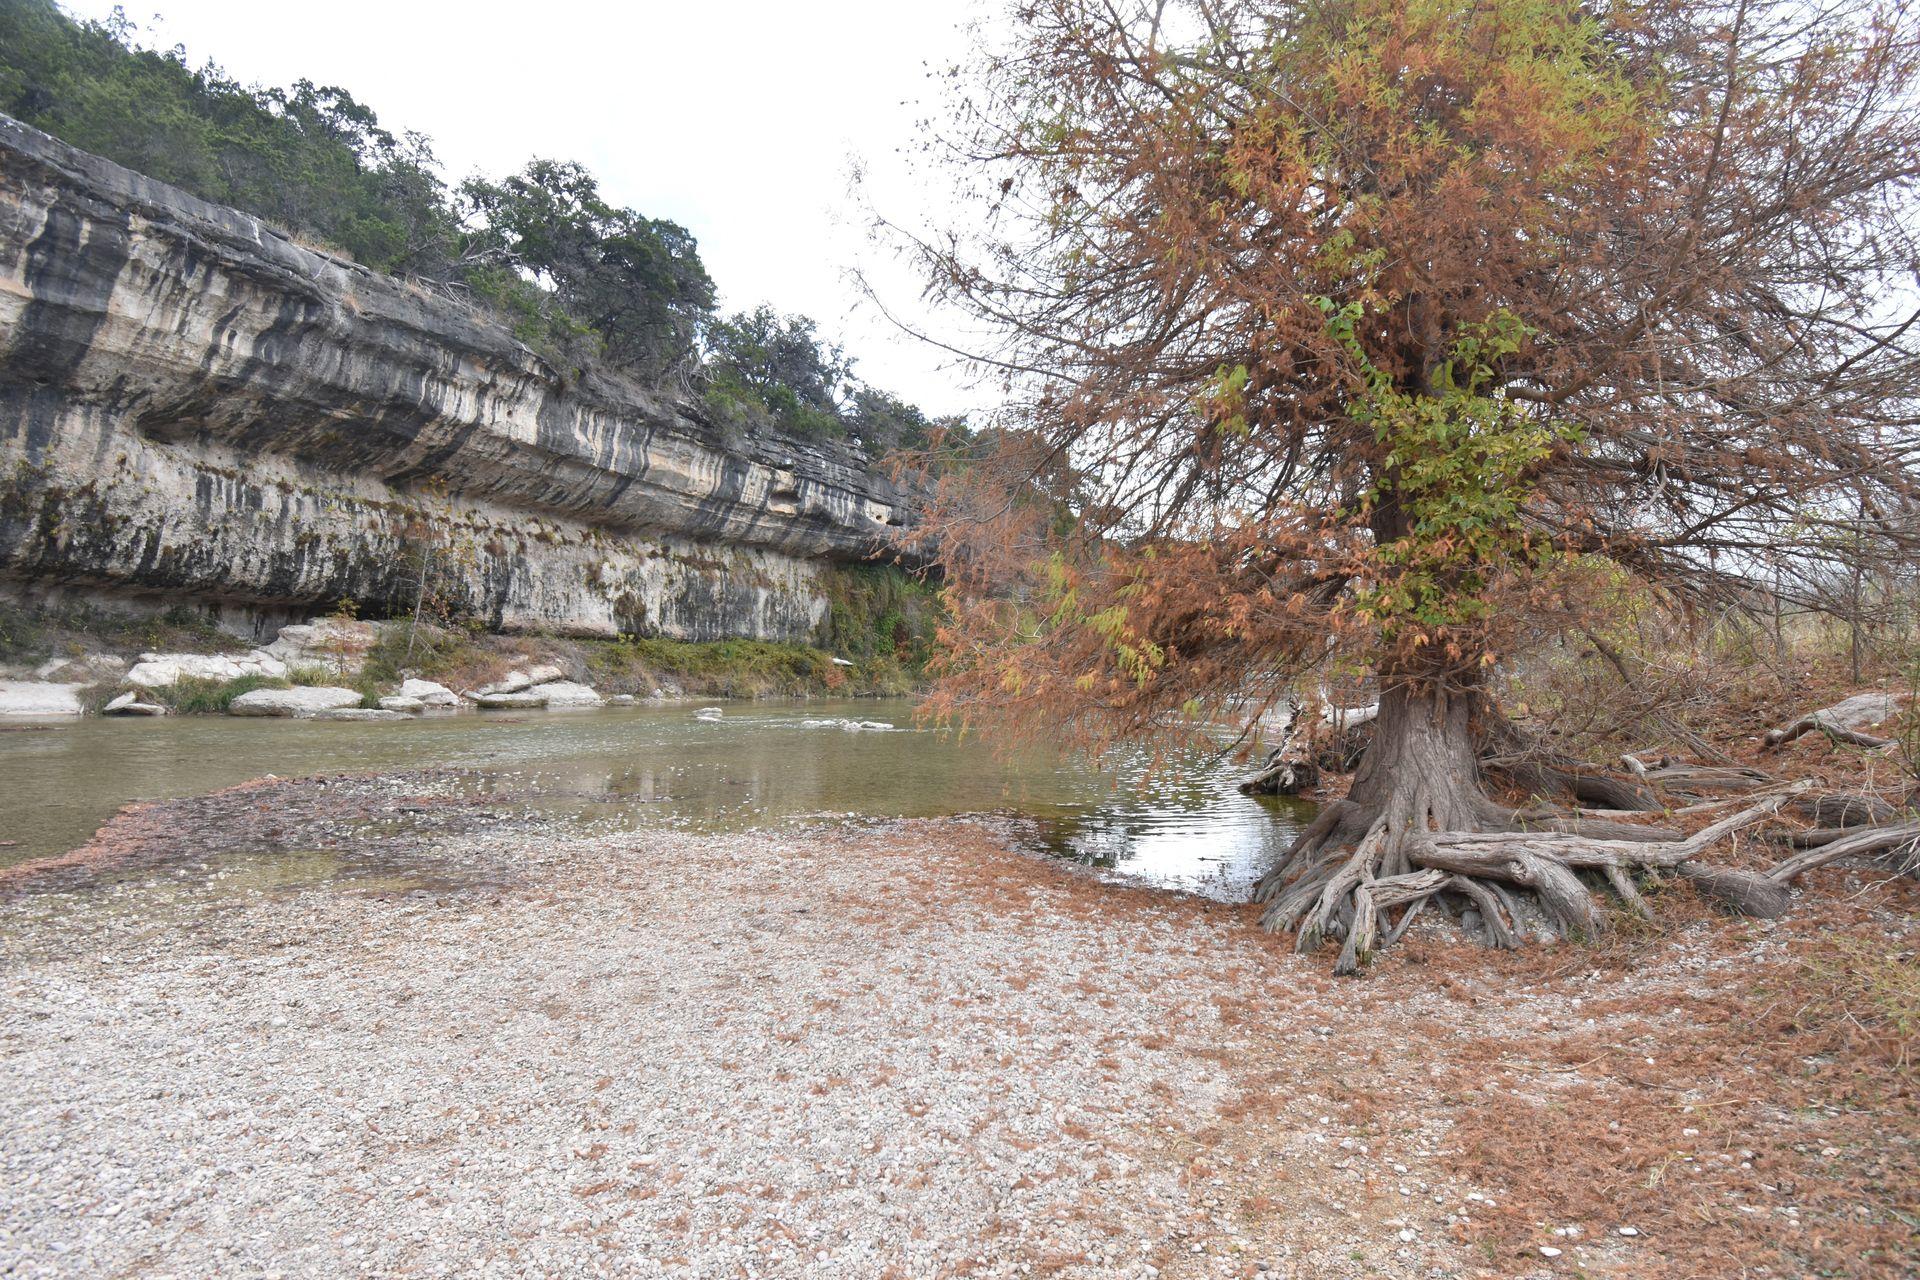 A tree with fall foliage on the edge of Guadalupe River. Across the river, there is a rock wall stiped in lighter and darker colors.